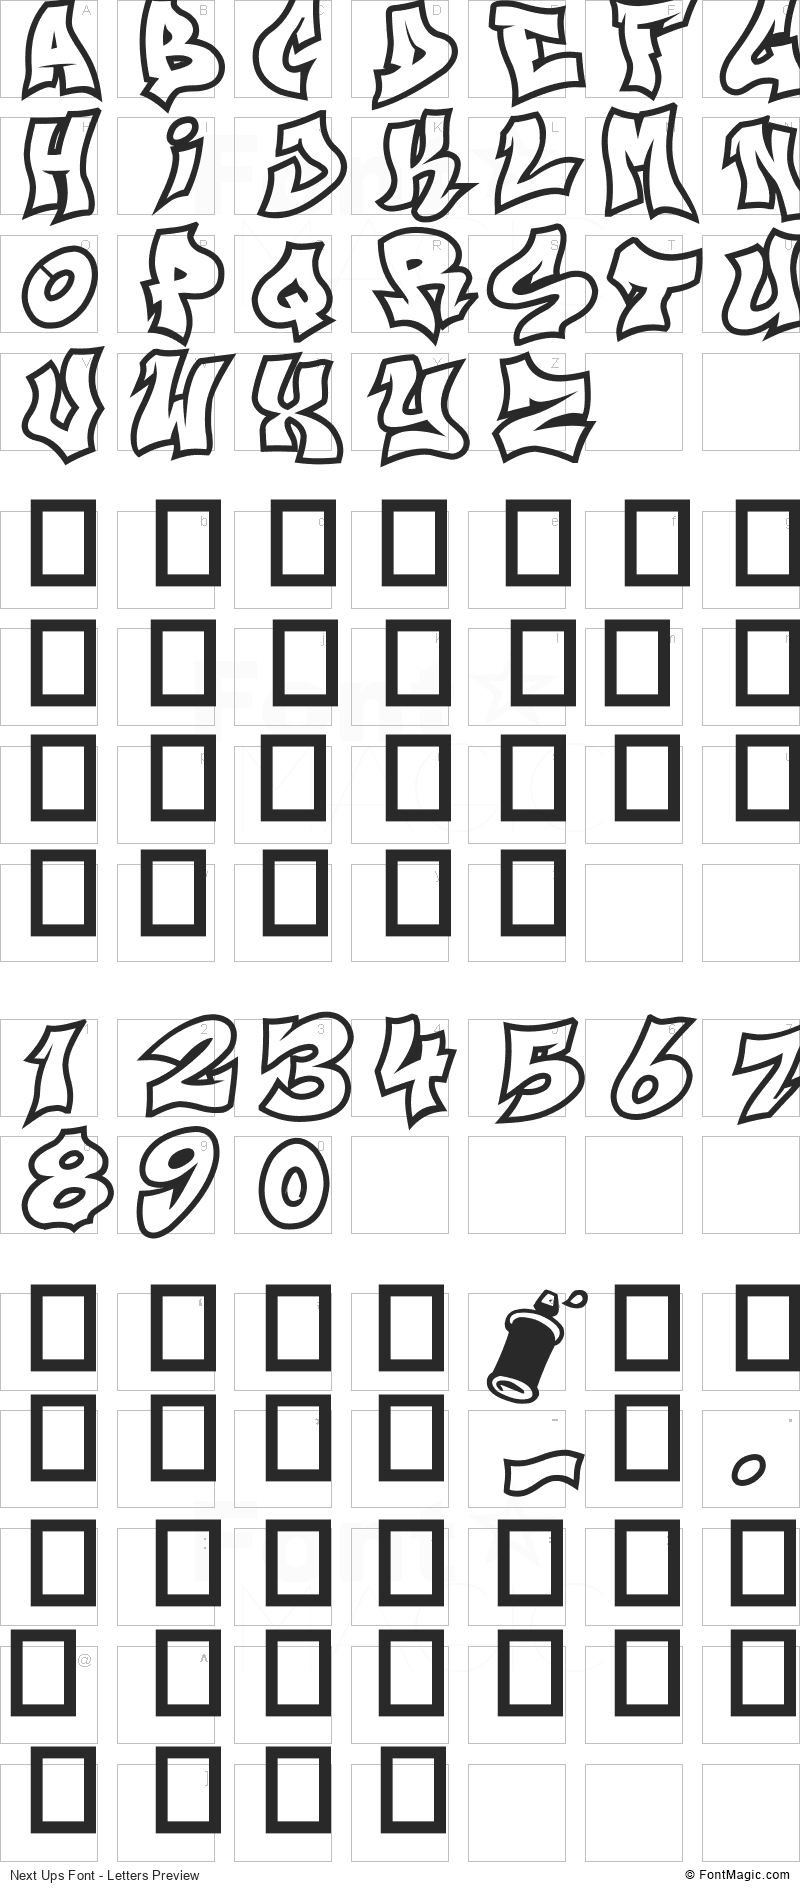 Next Ups Font - All Latters Preview Chart